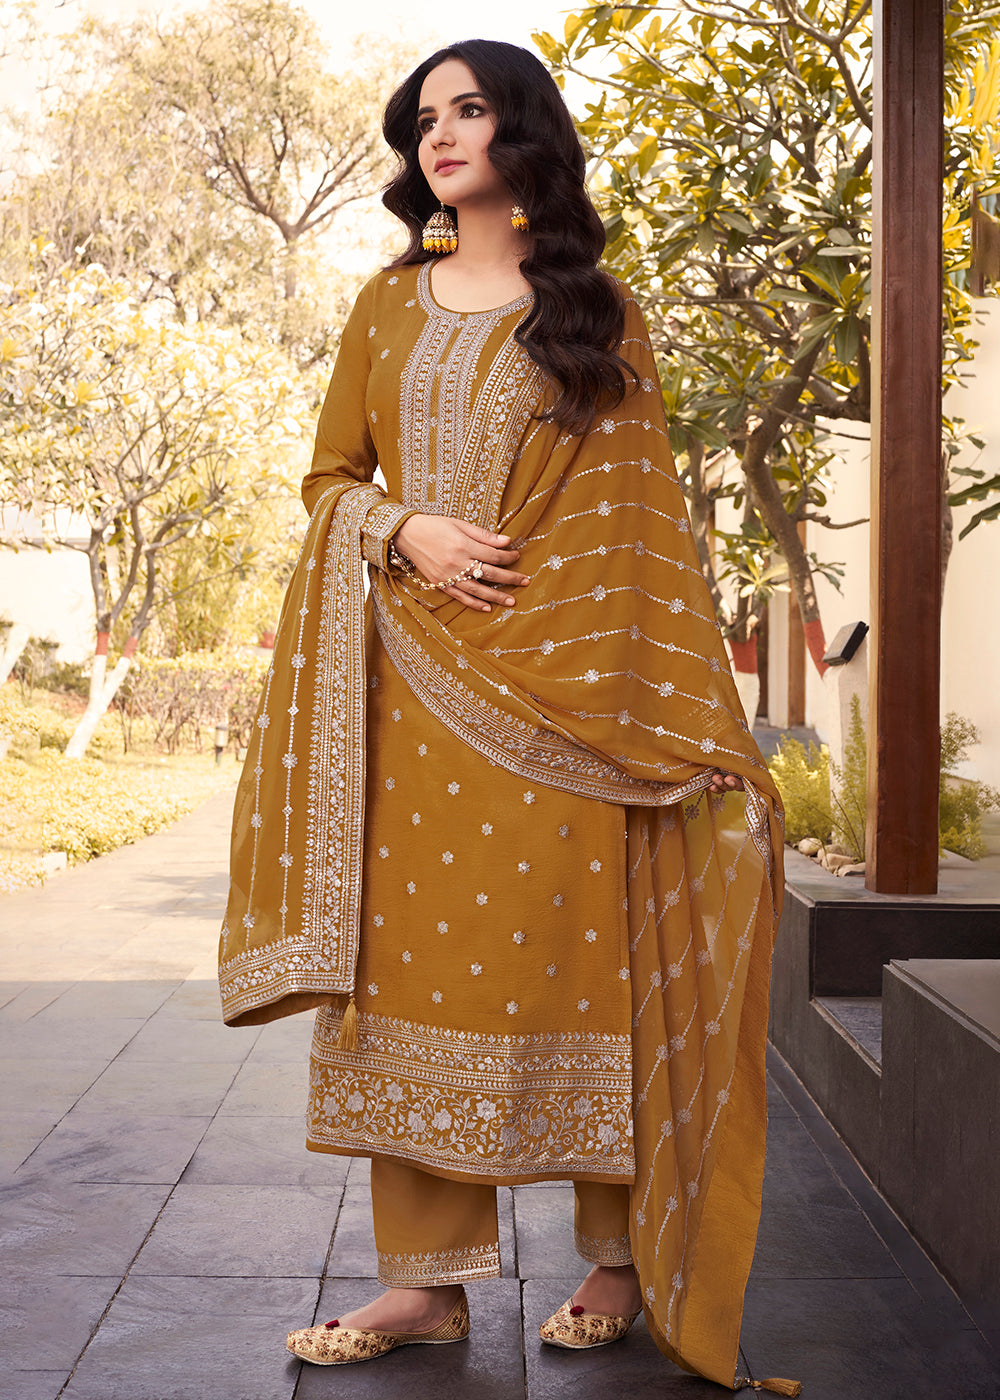 Buy Now Dola Silk Pretty Mustard Embroidered Festive Salwar Suit Online in USA, UK, Canada, Germany, Australia & Worldwide at Empress Clothing.